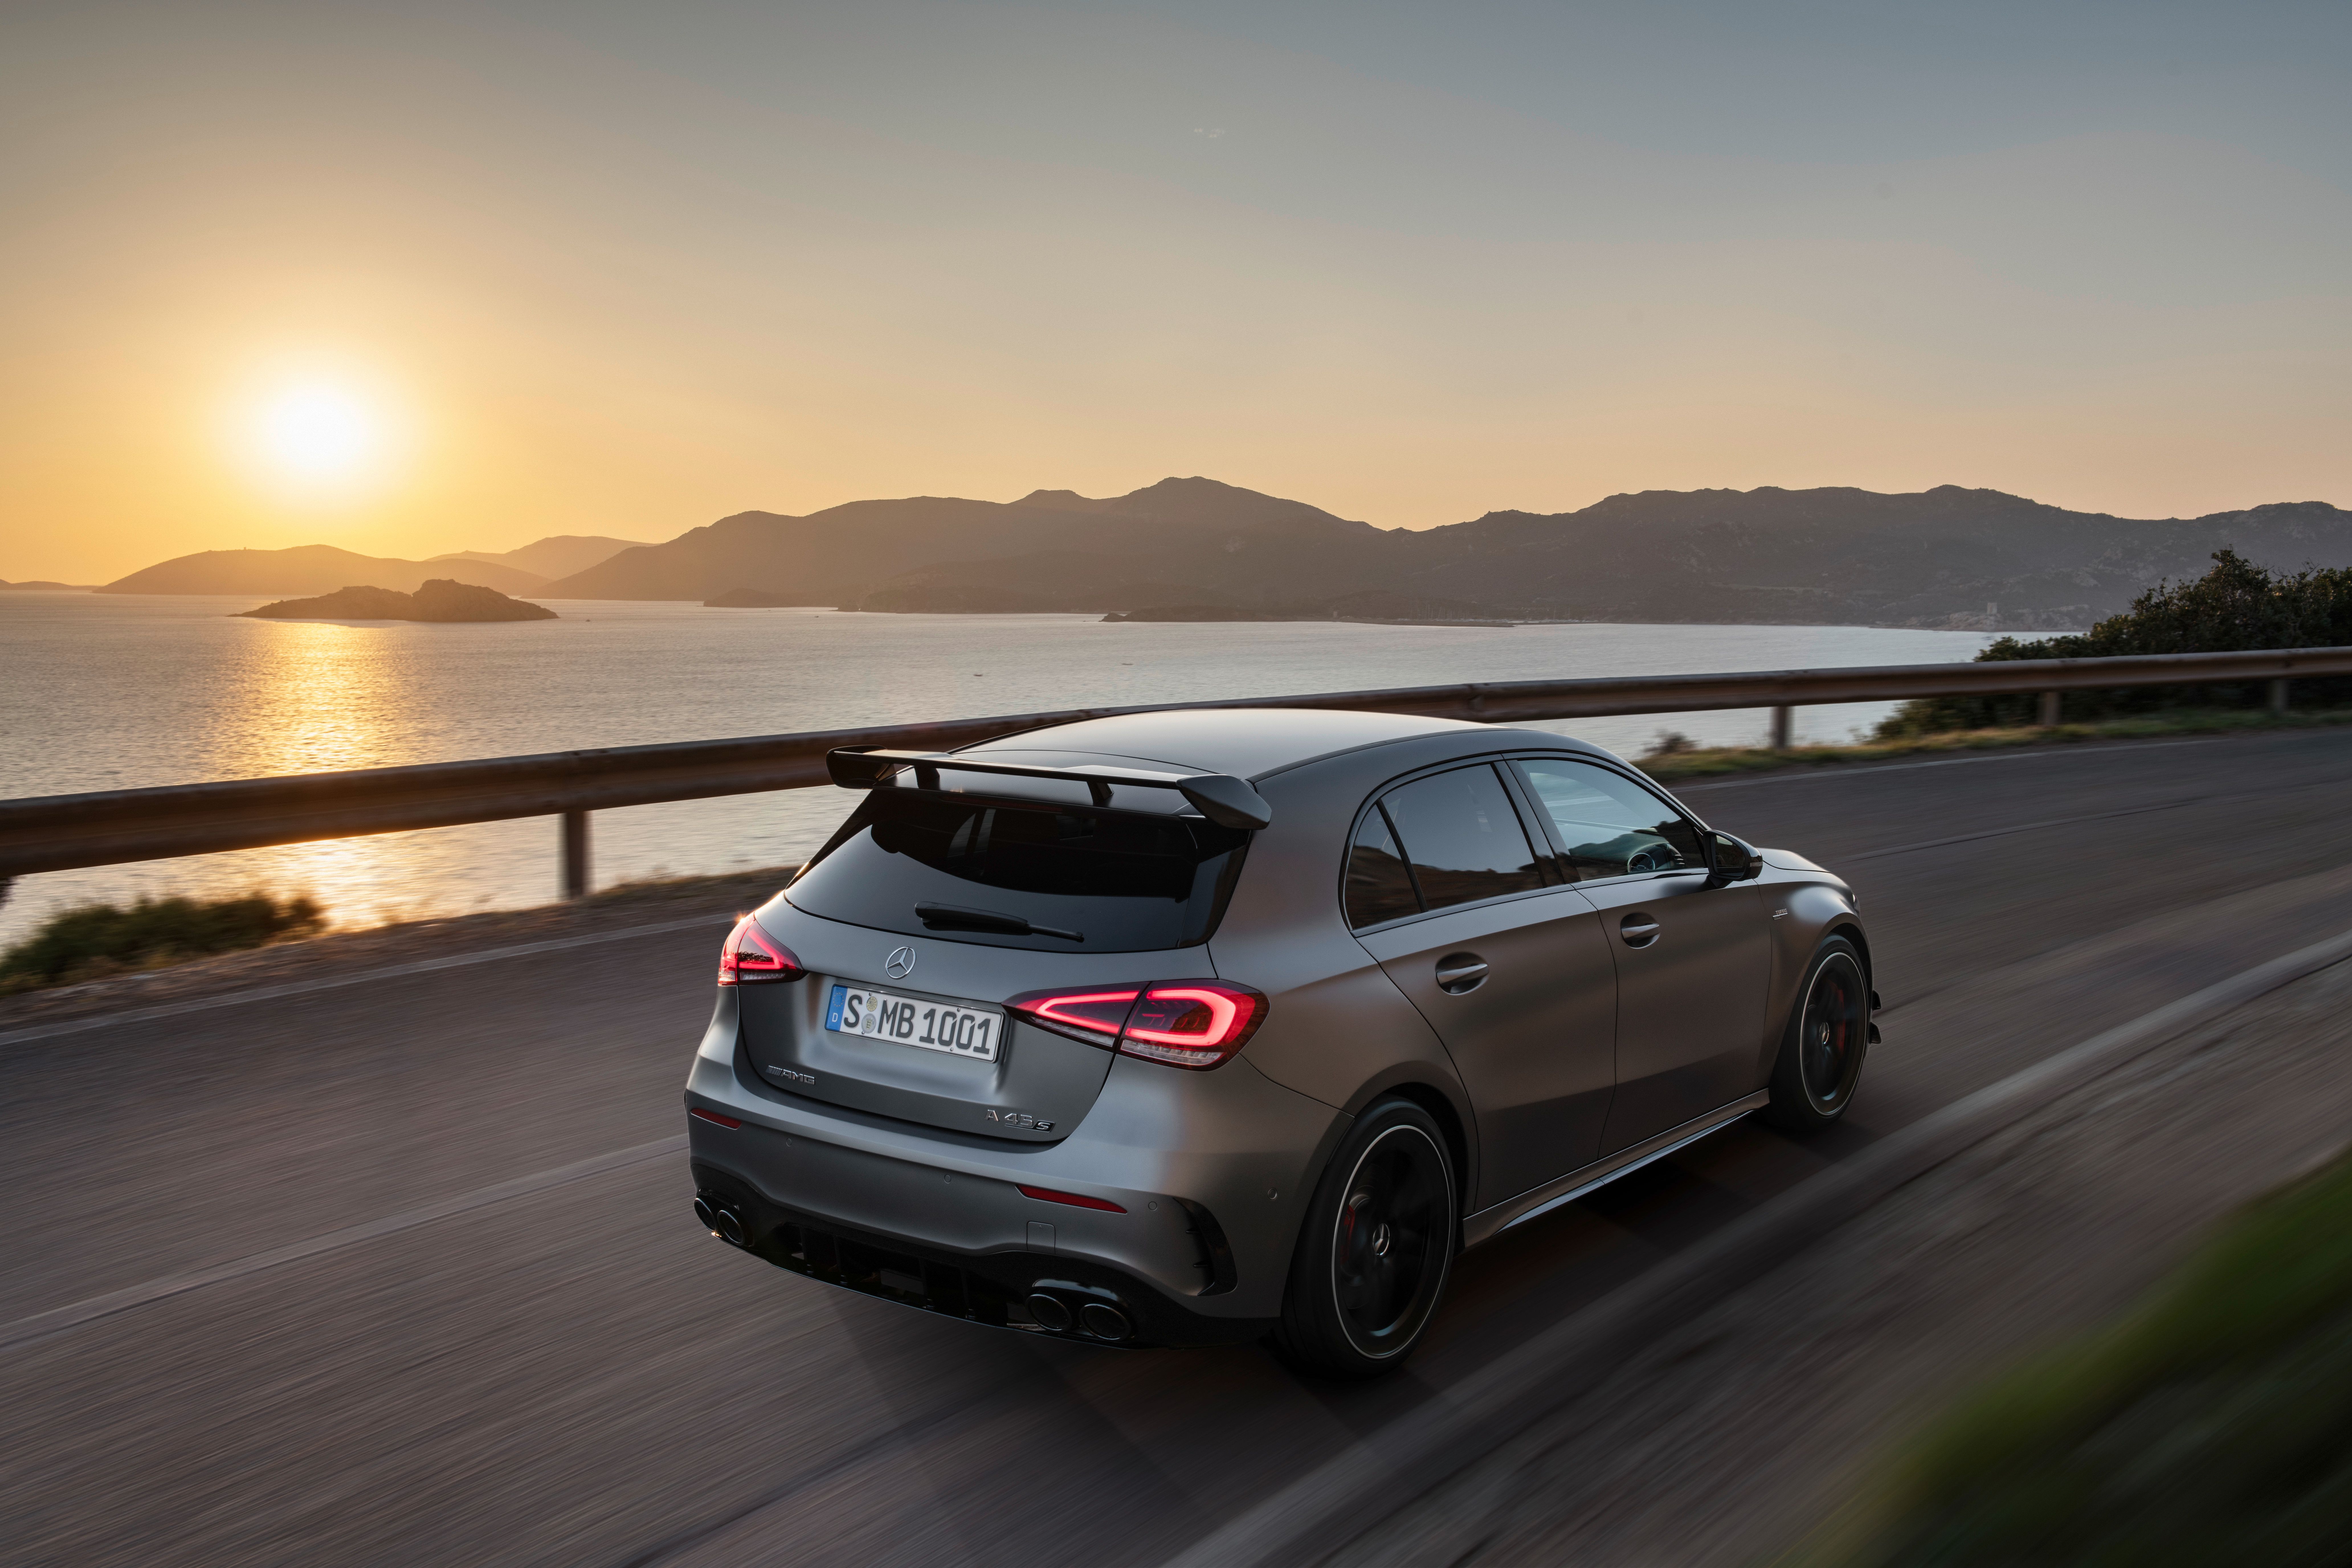 2018 - 2019 Wallpaper of the Day: 2020 Mercedes-AMG A45 Hatchback